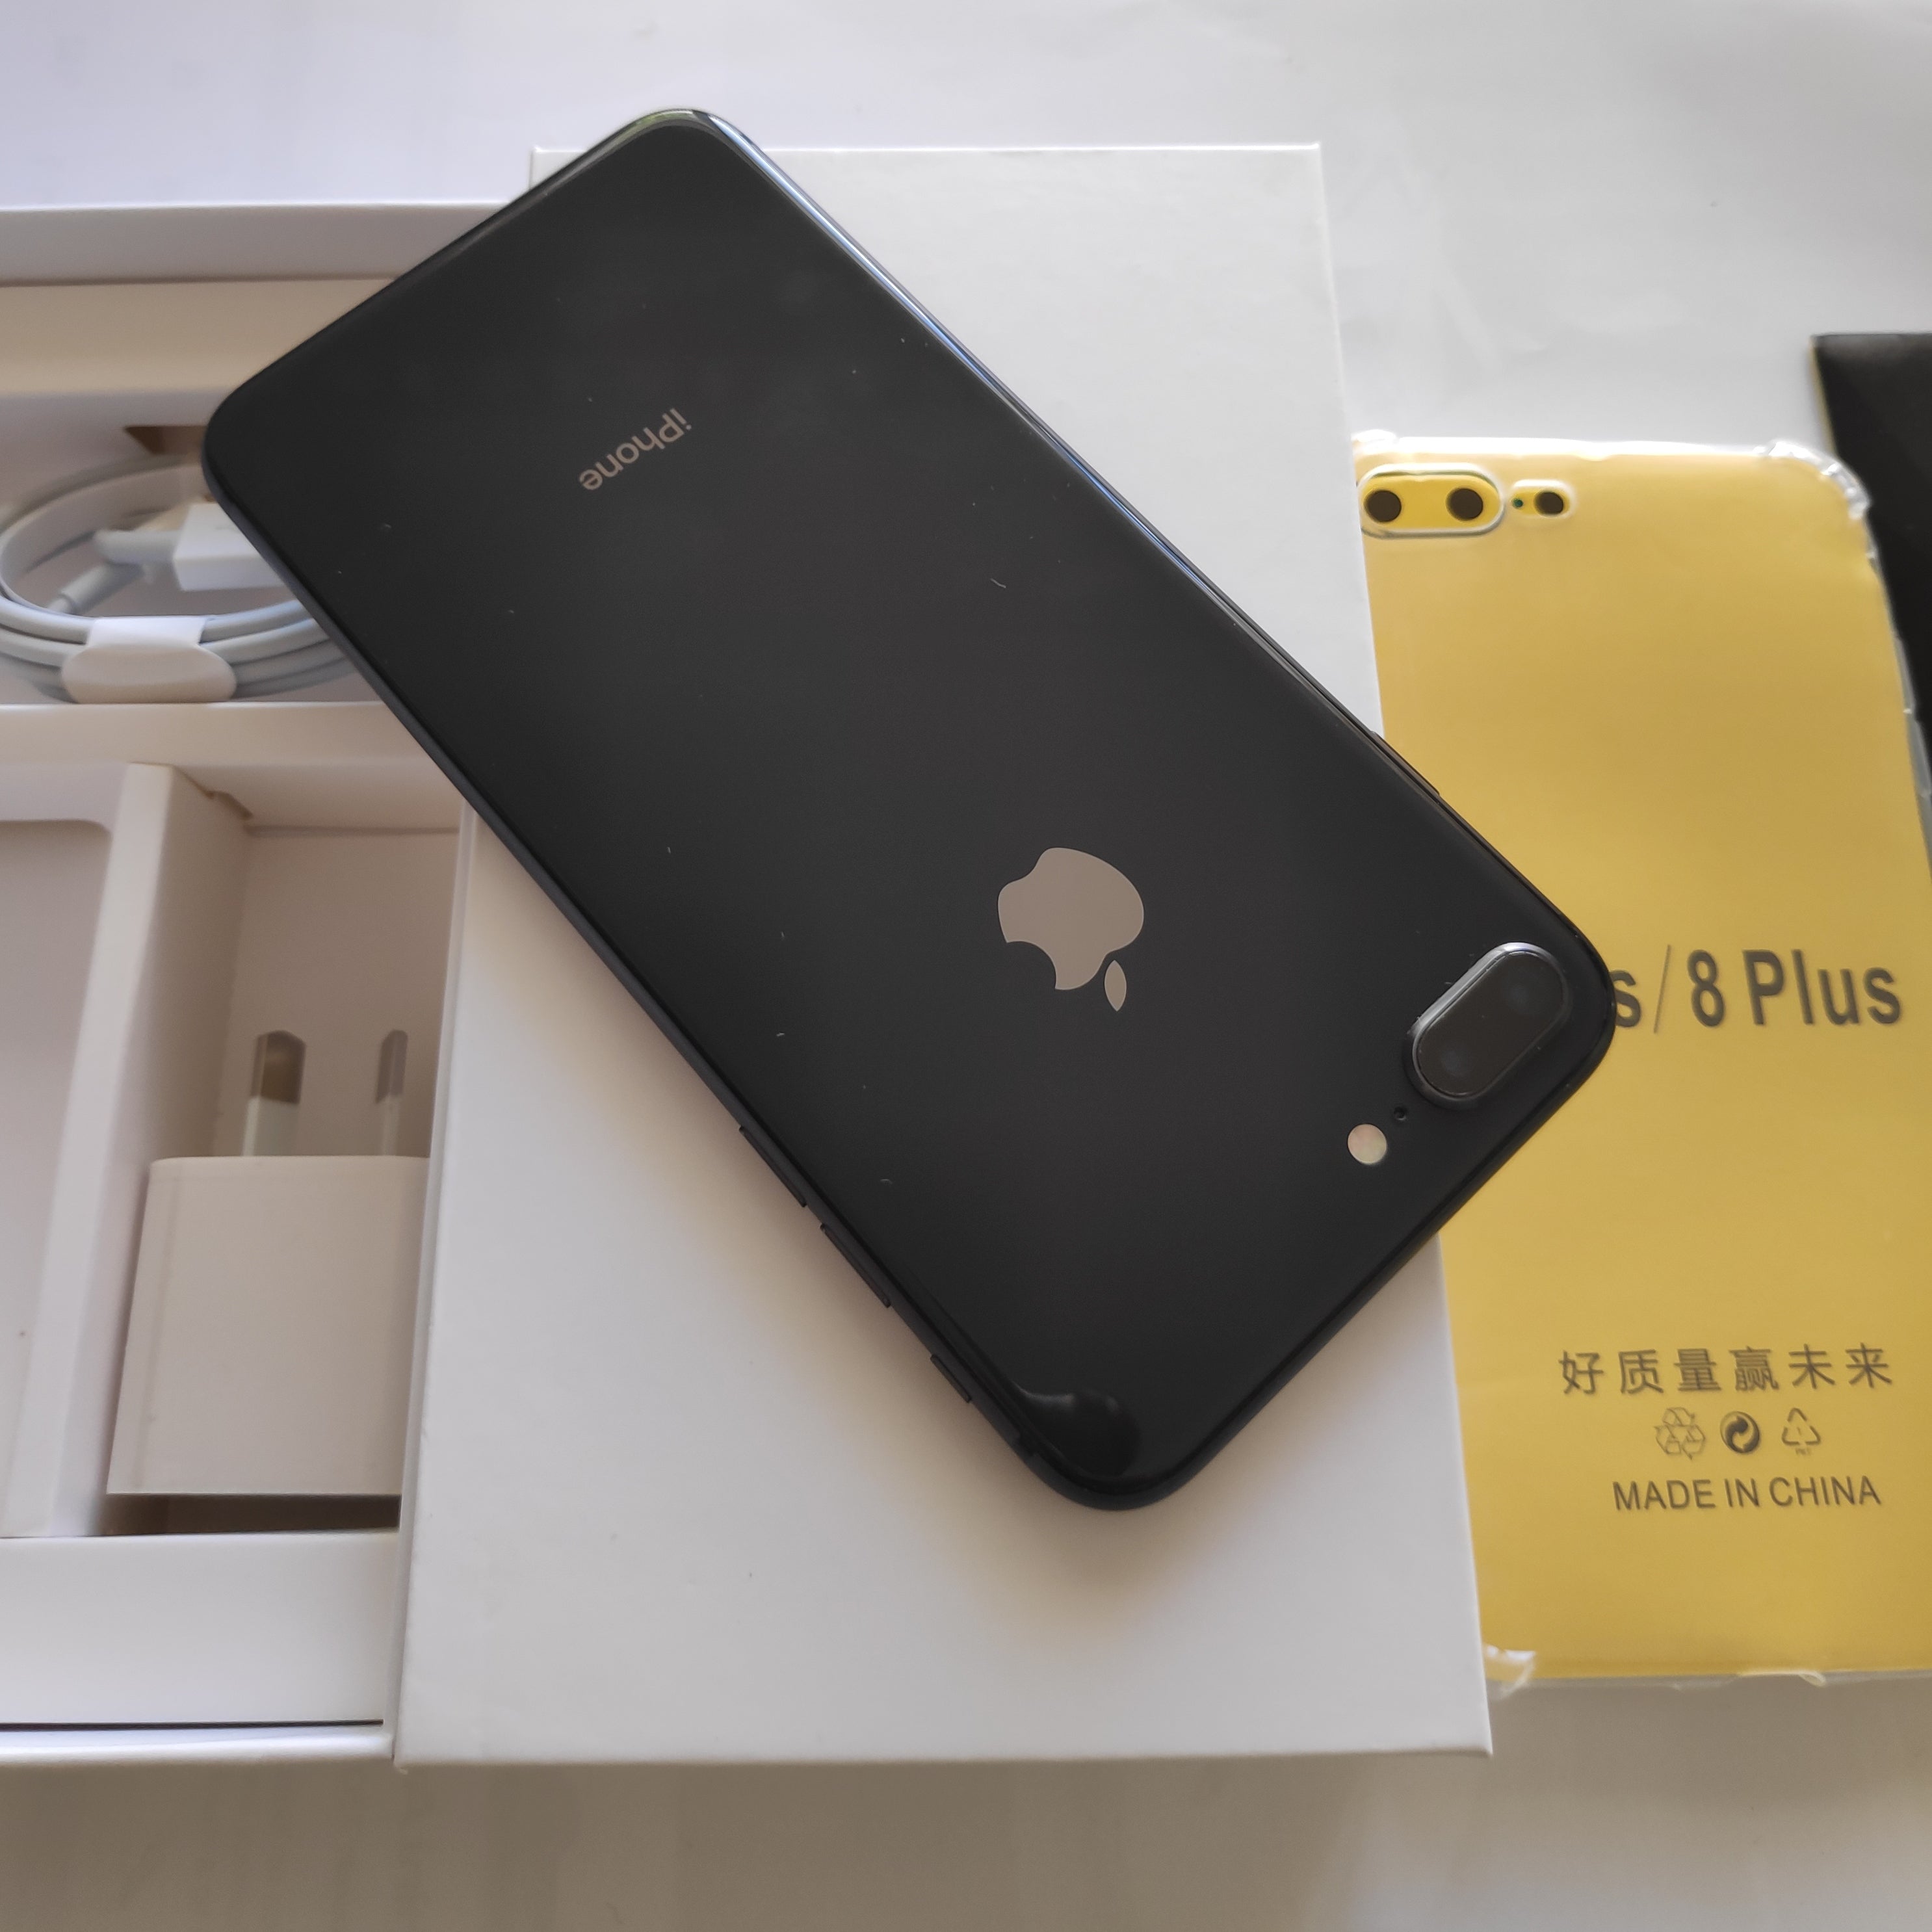 Affordable iPhone 8 Plus,laybuy phones nz,Pre-owned iPhone 8 Plus